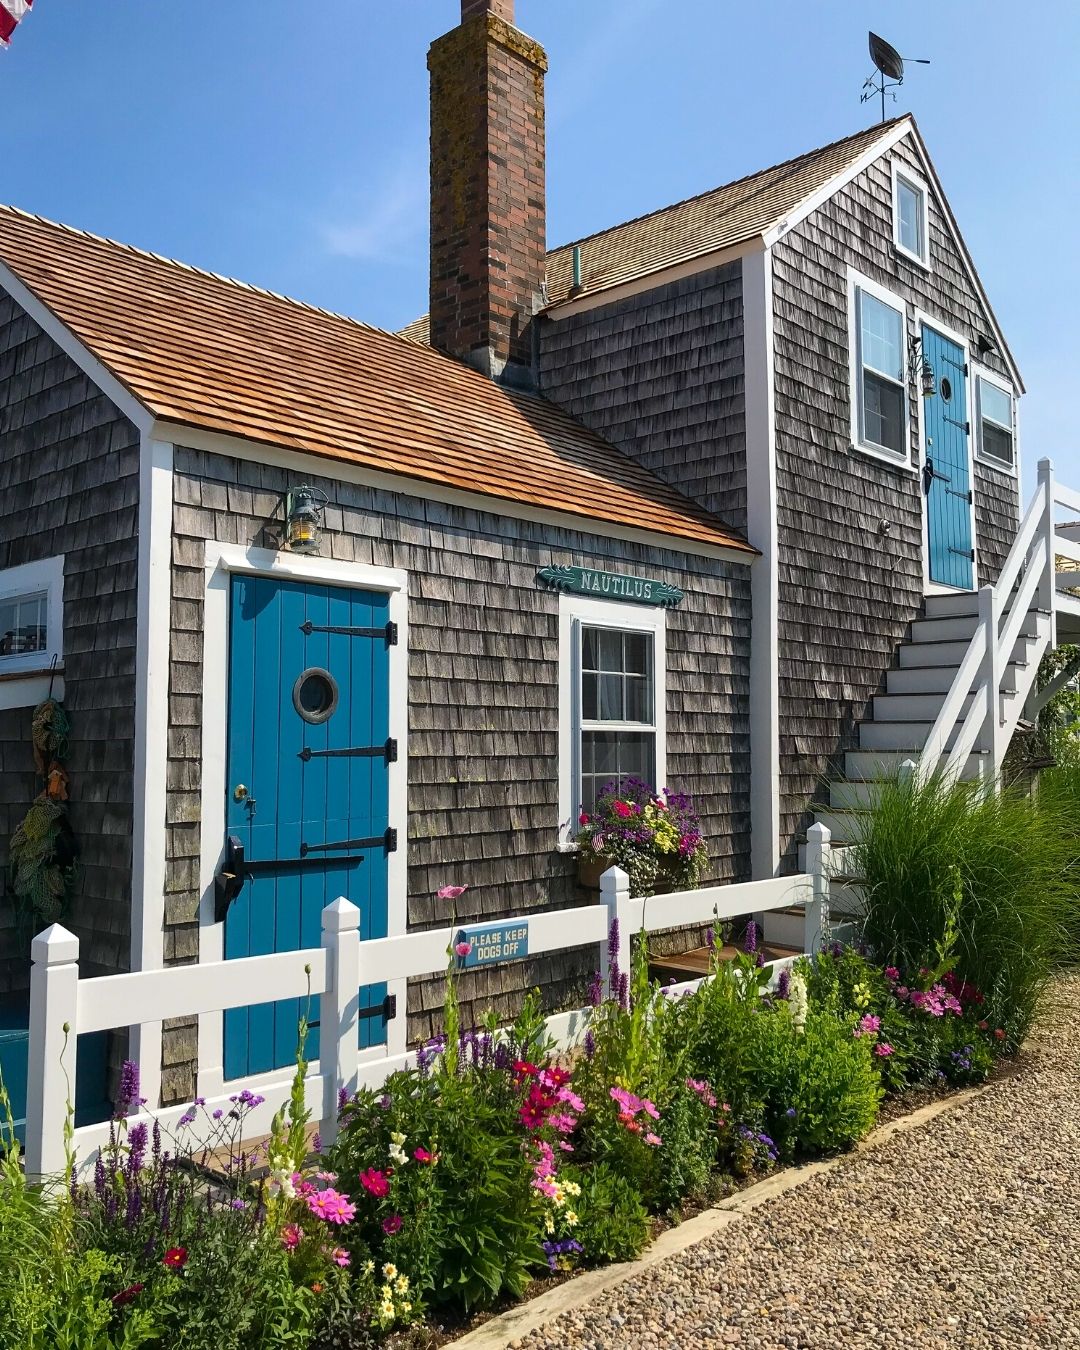 The Nantucket Hotel and Resort is a great choice when looking for places to stay on the island of Nantucket, MA